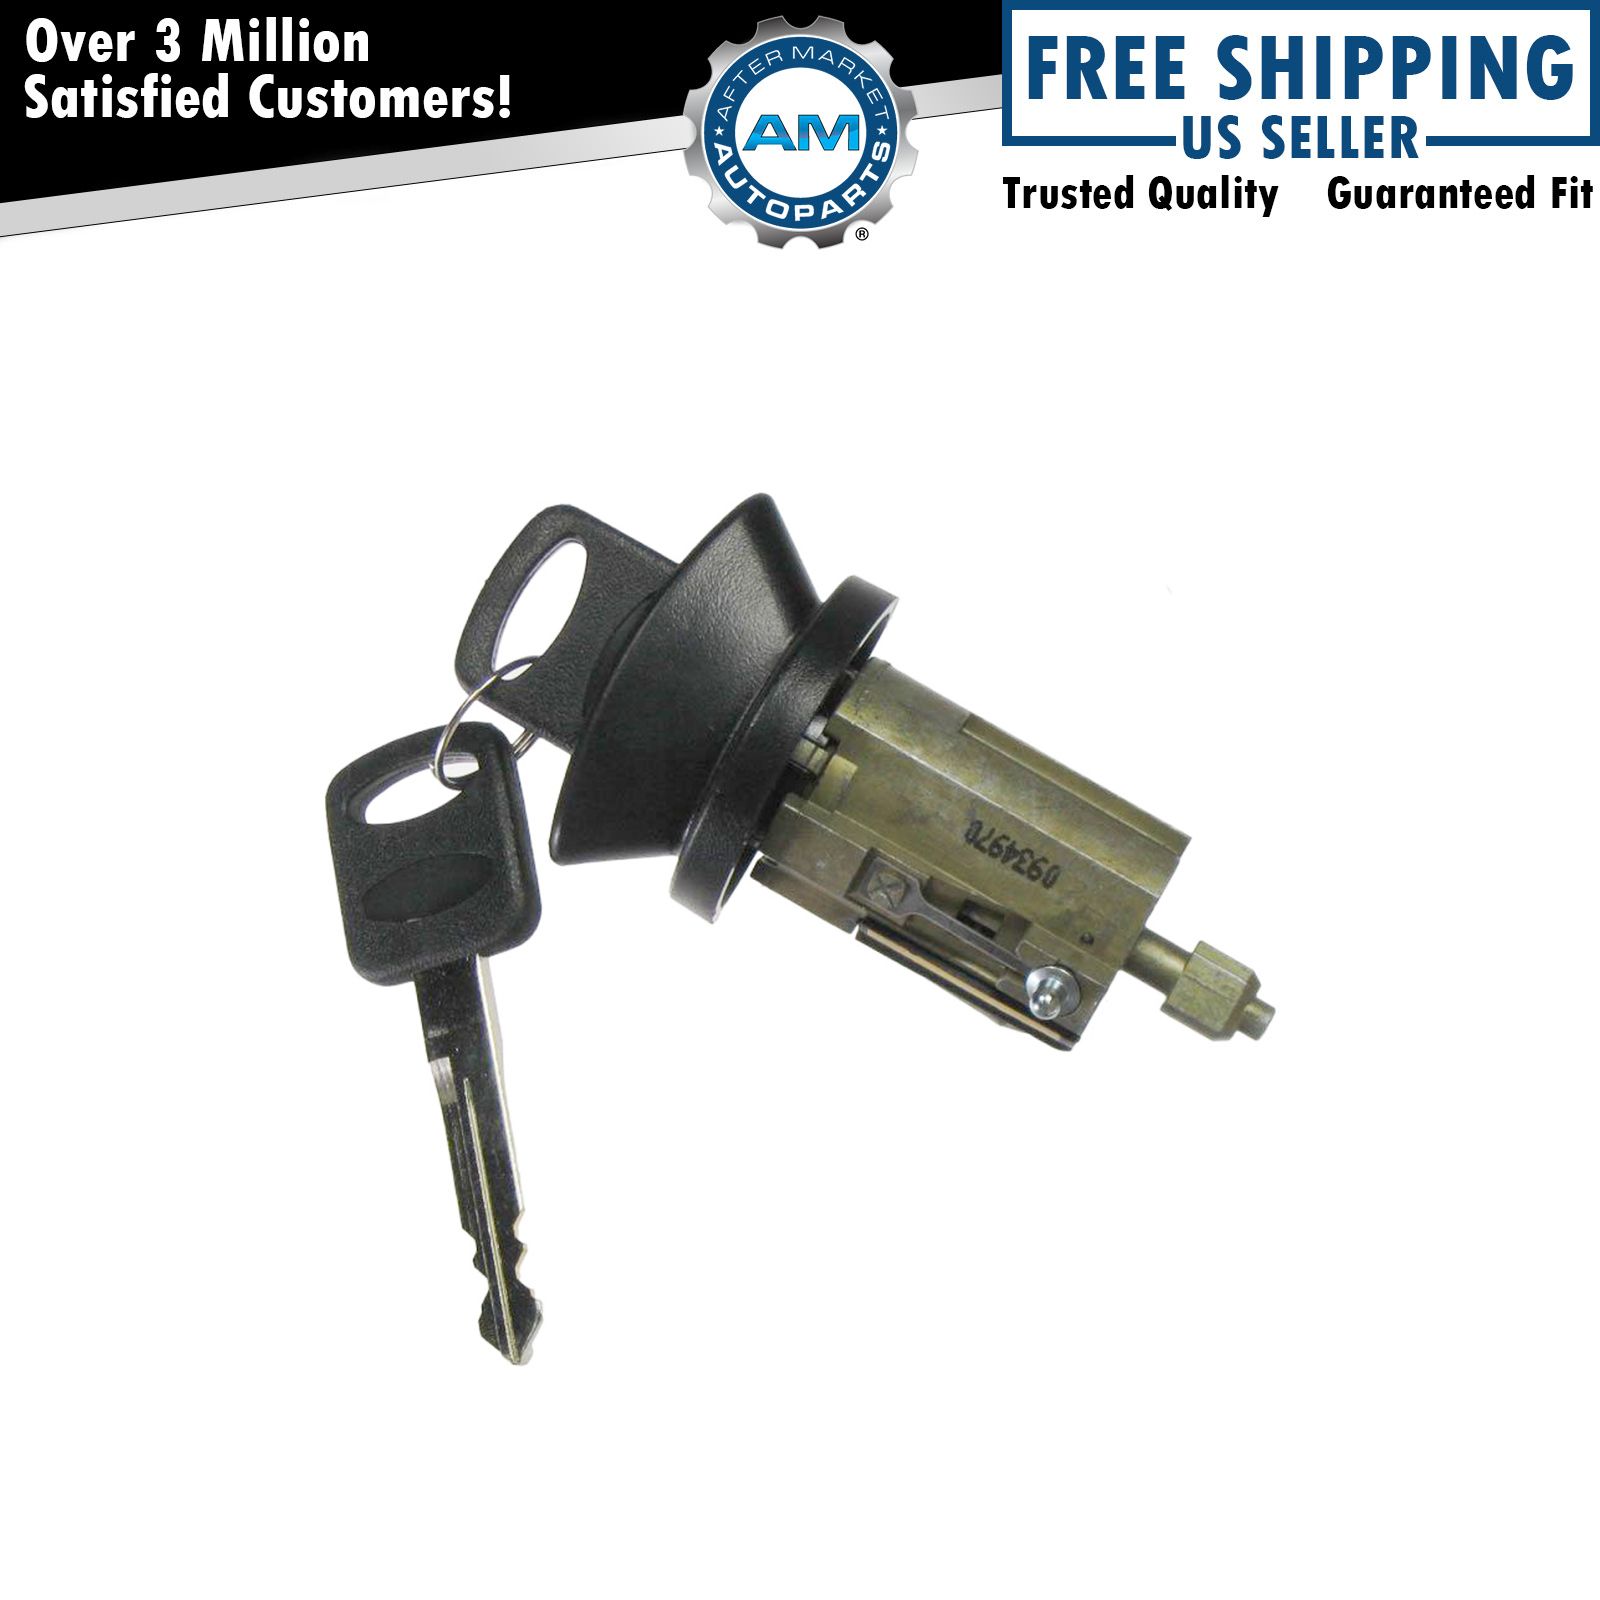 Black Bezel Ignition Lock Cylinder w/ Key for Ford Mercury Lincoln Pickup Truck